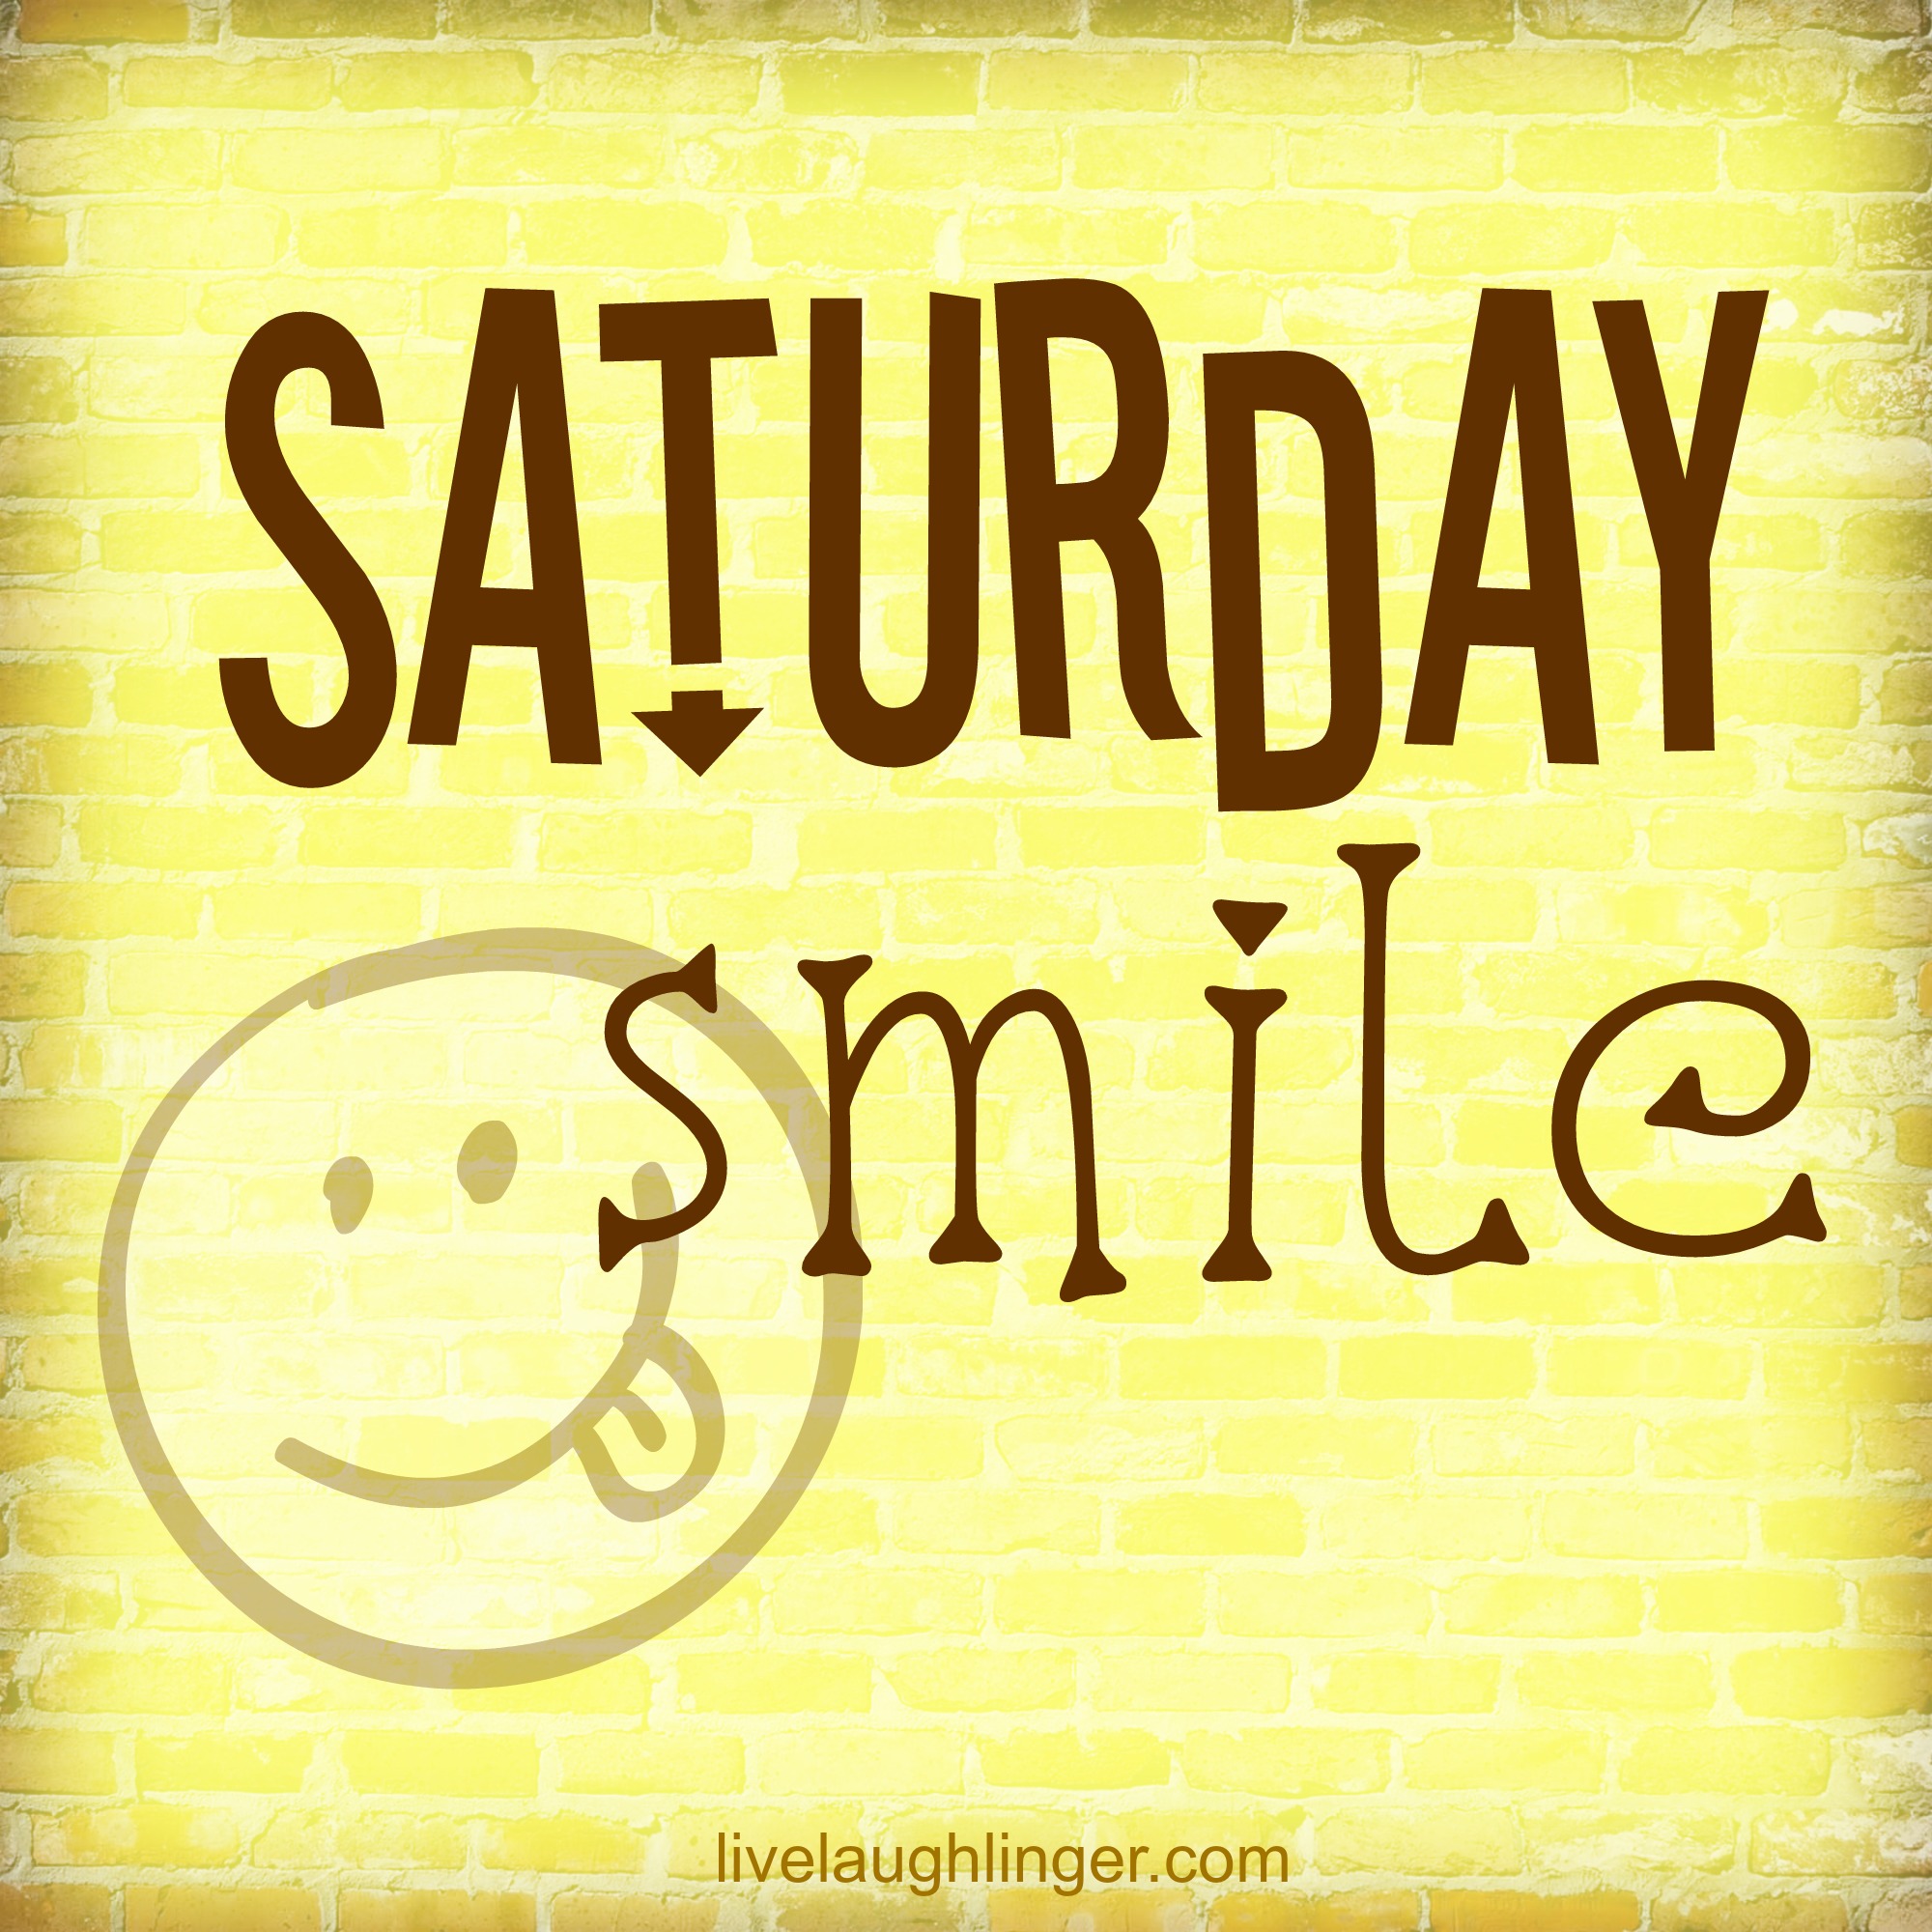 Saturday Smile Wallpaper Hope You Have A Great Weekend